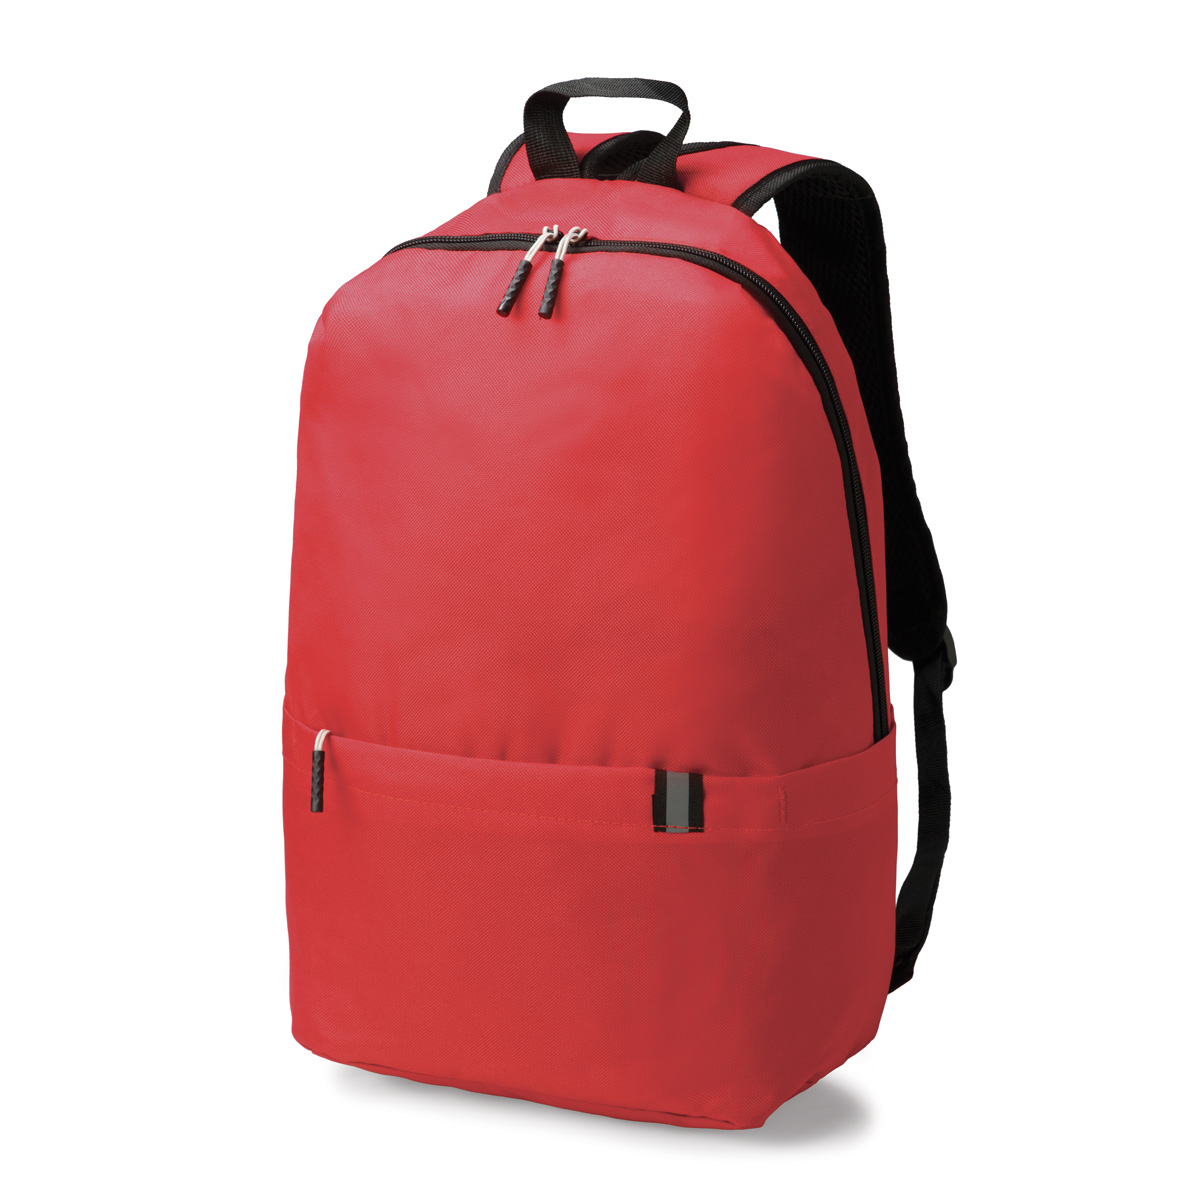 Budley Backpack Product Image